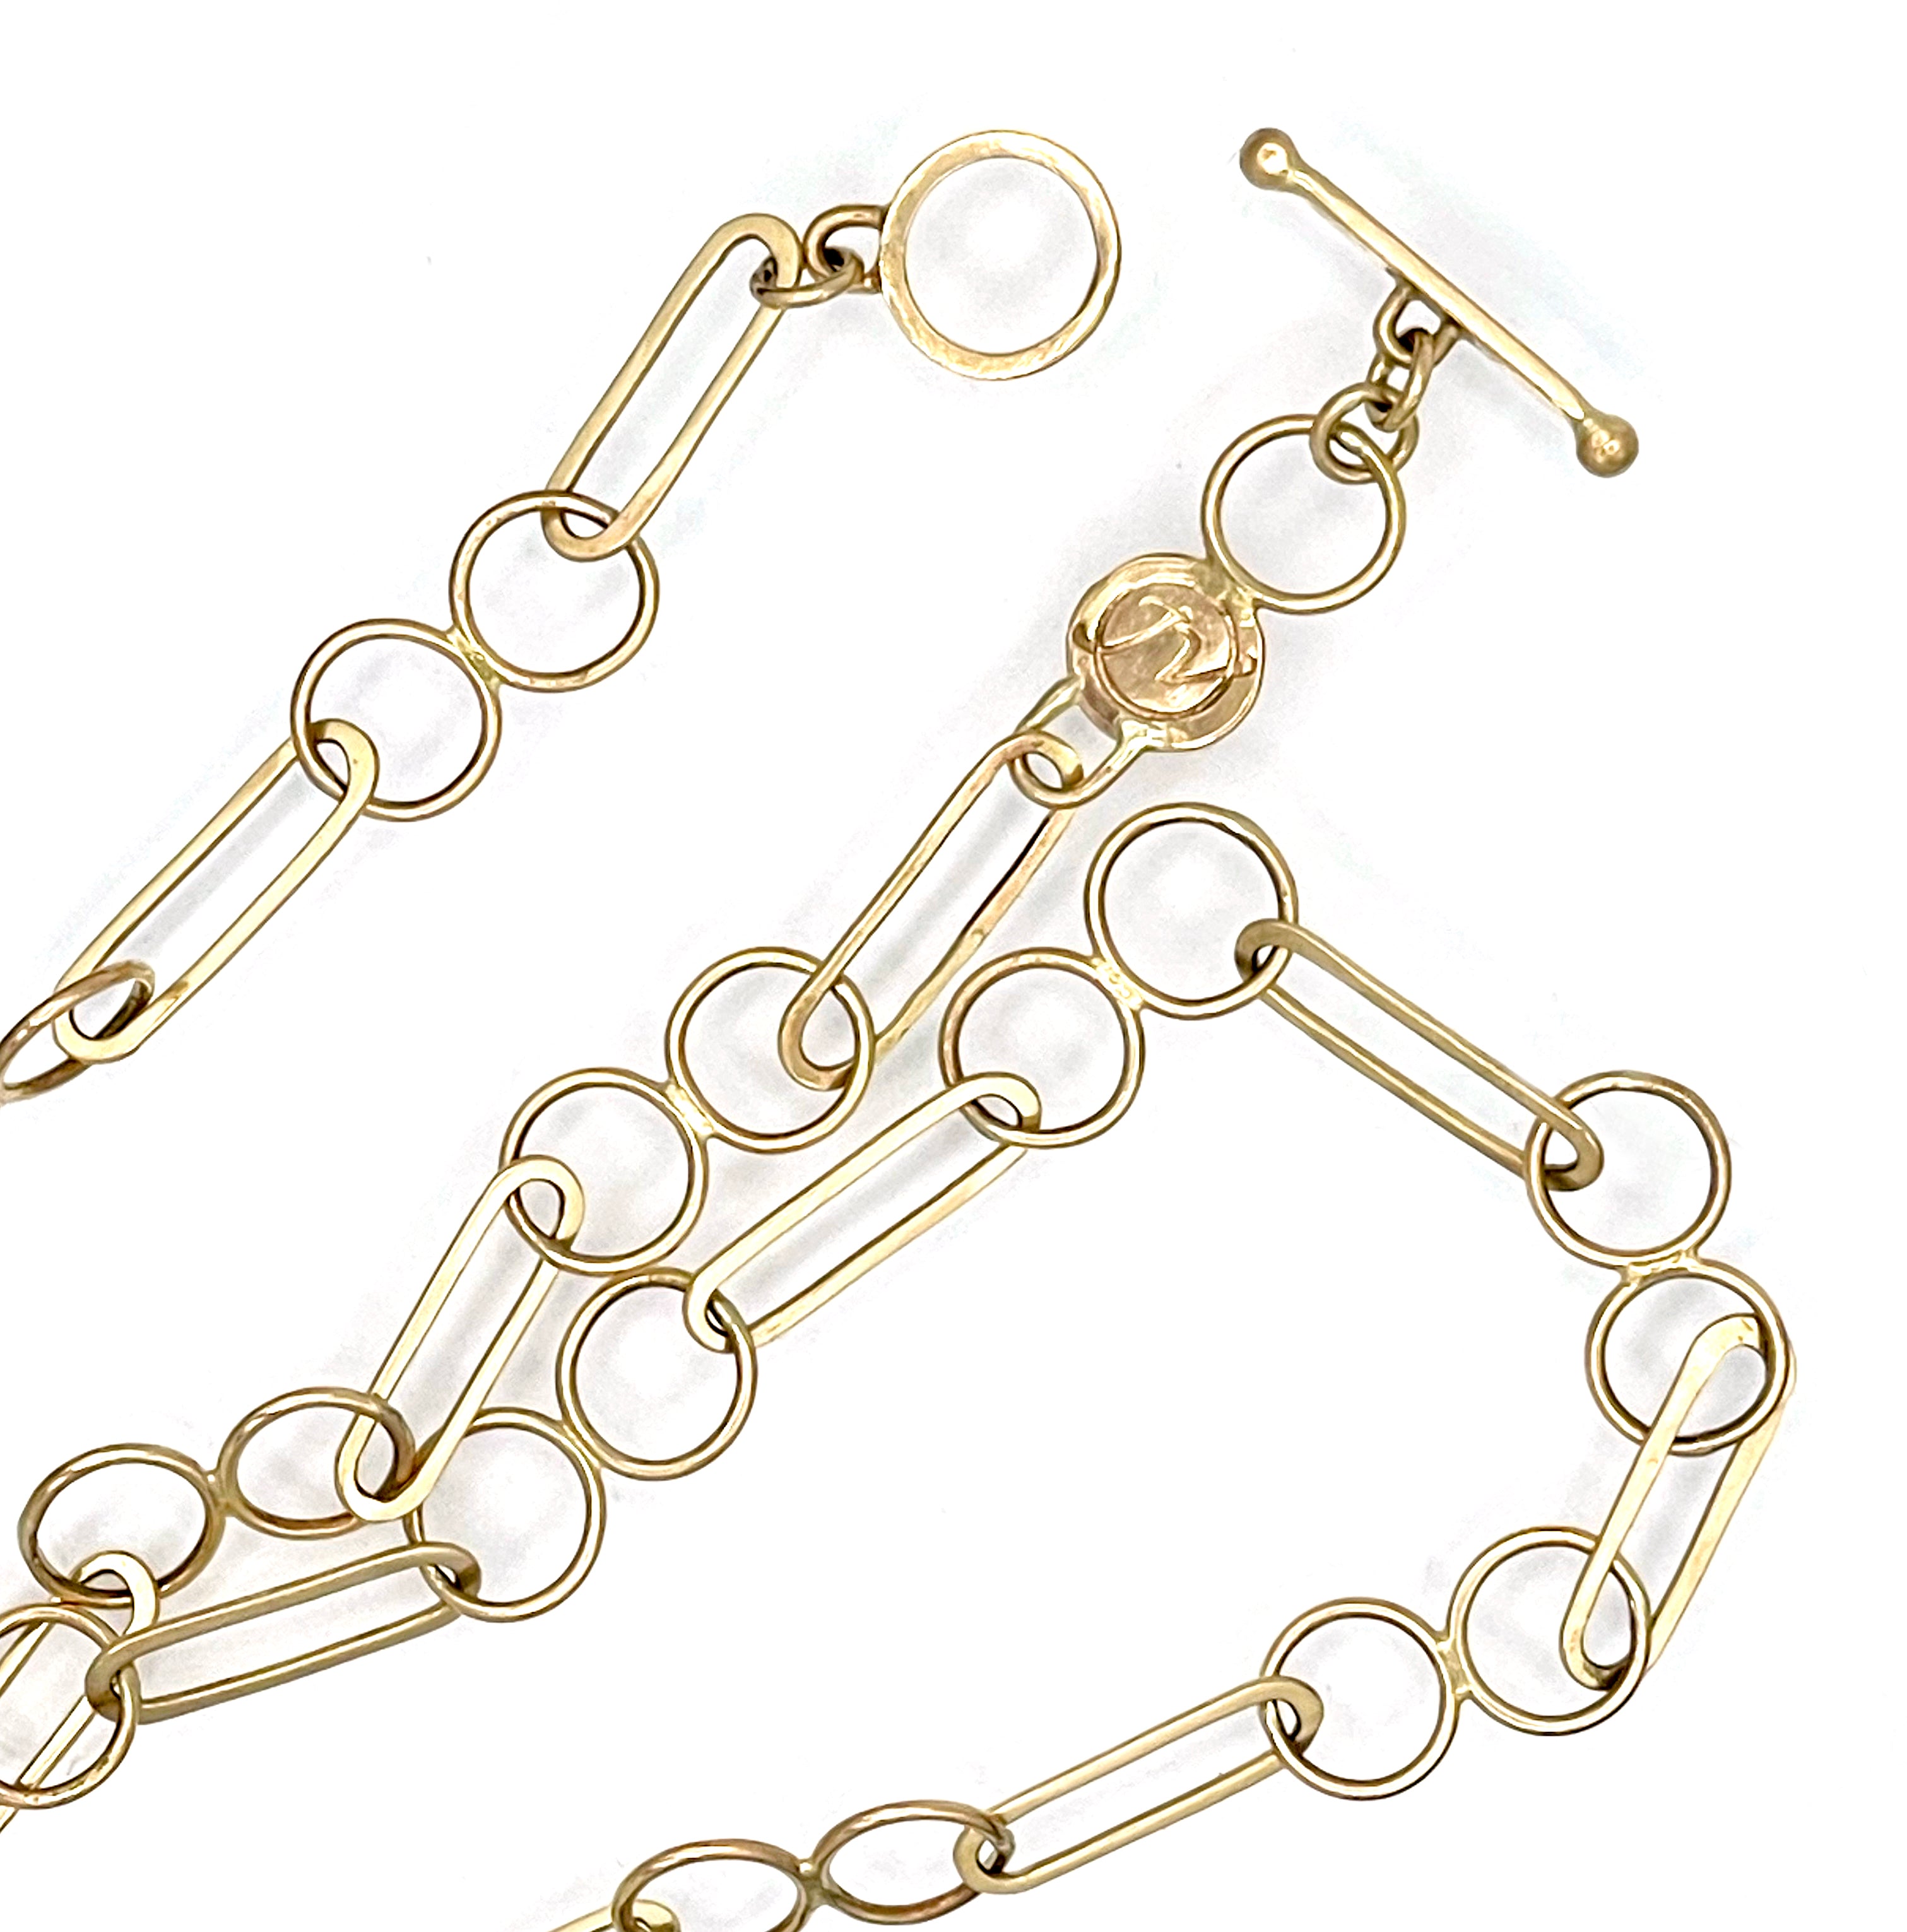 14K Solid Yellow Gold Chunky link Chain with Toggle Clasp, Handmade, One of a kind Trombone Chain